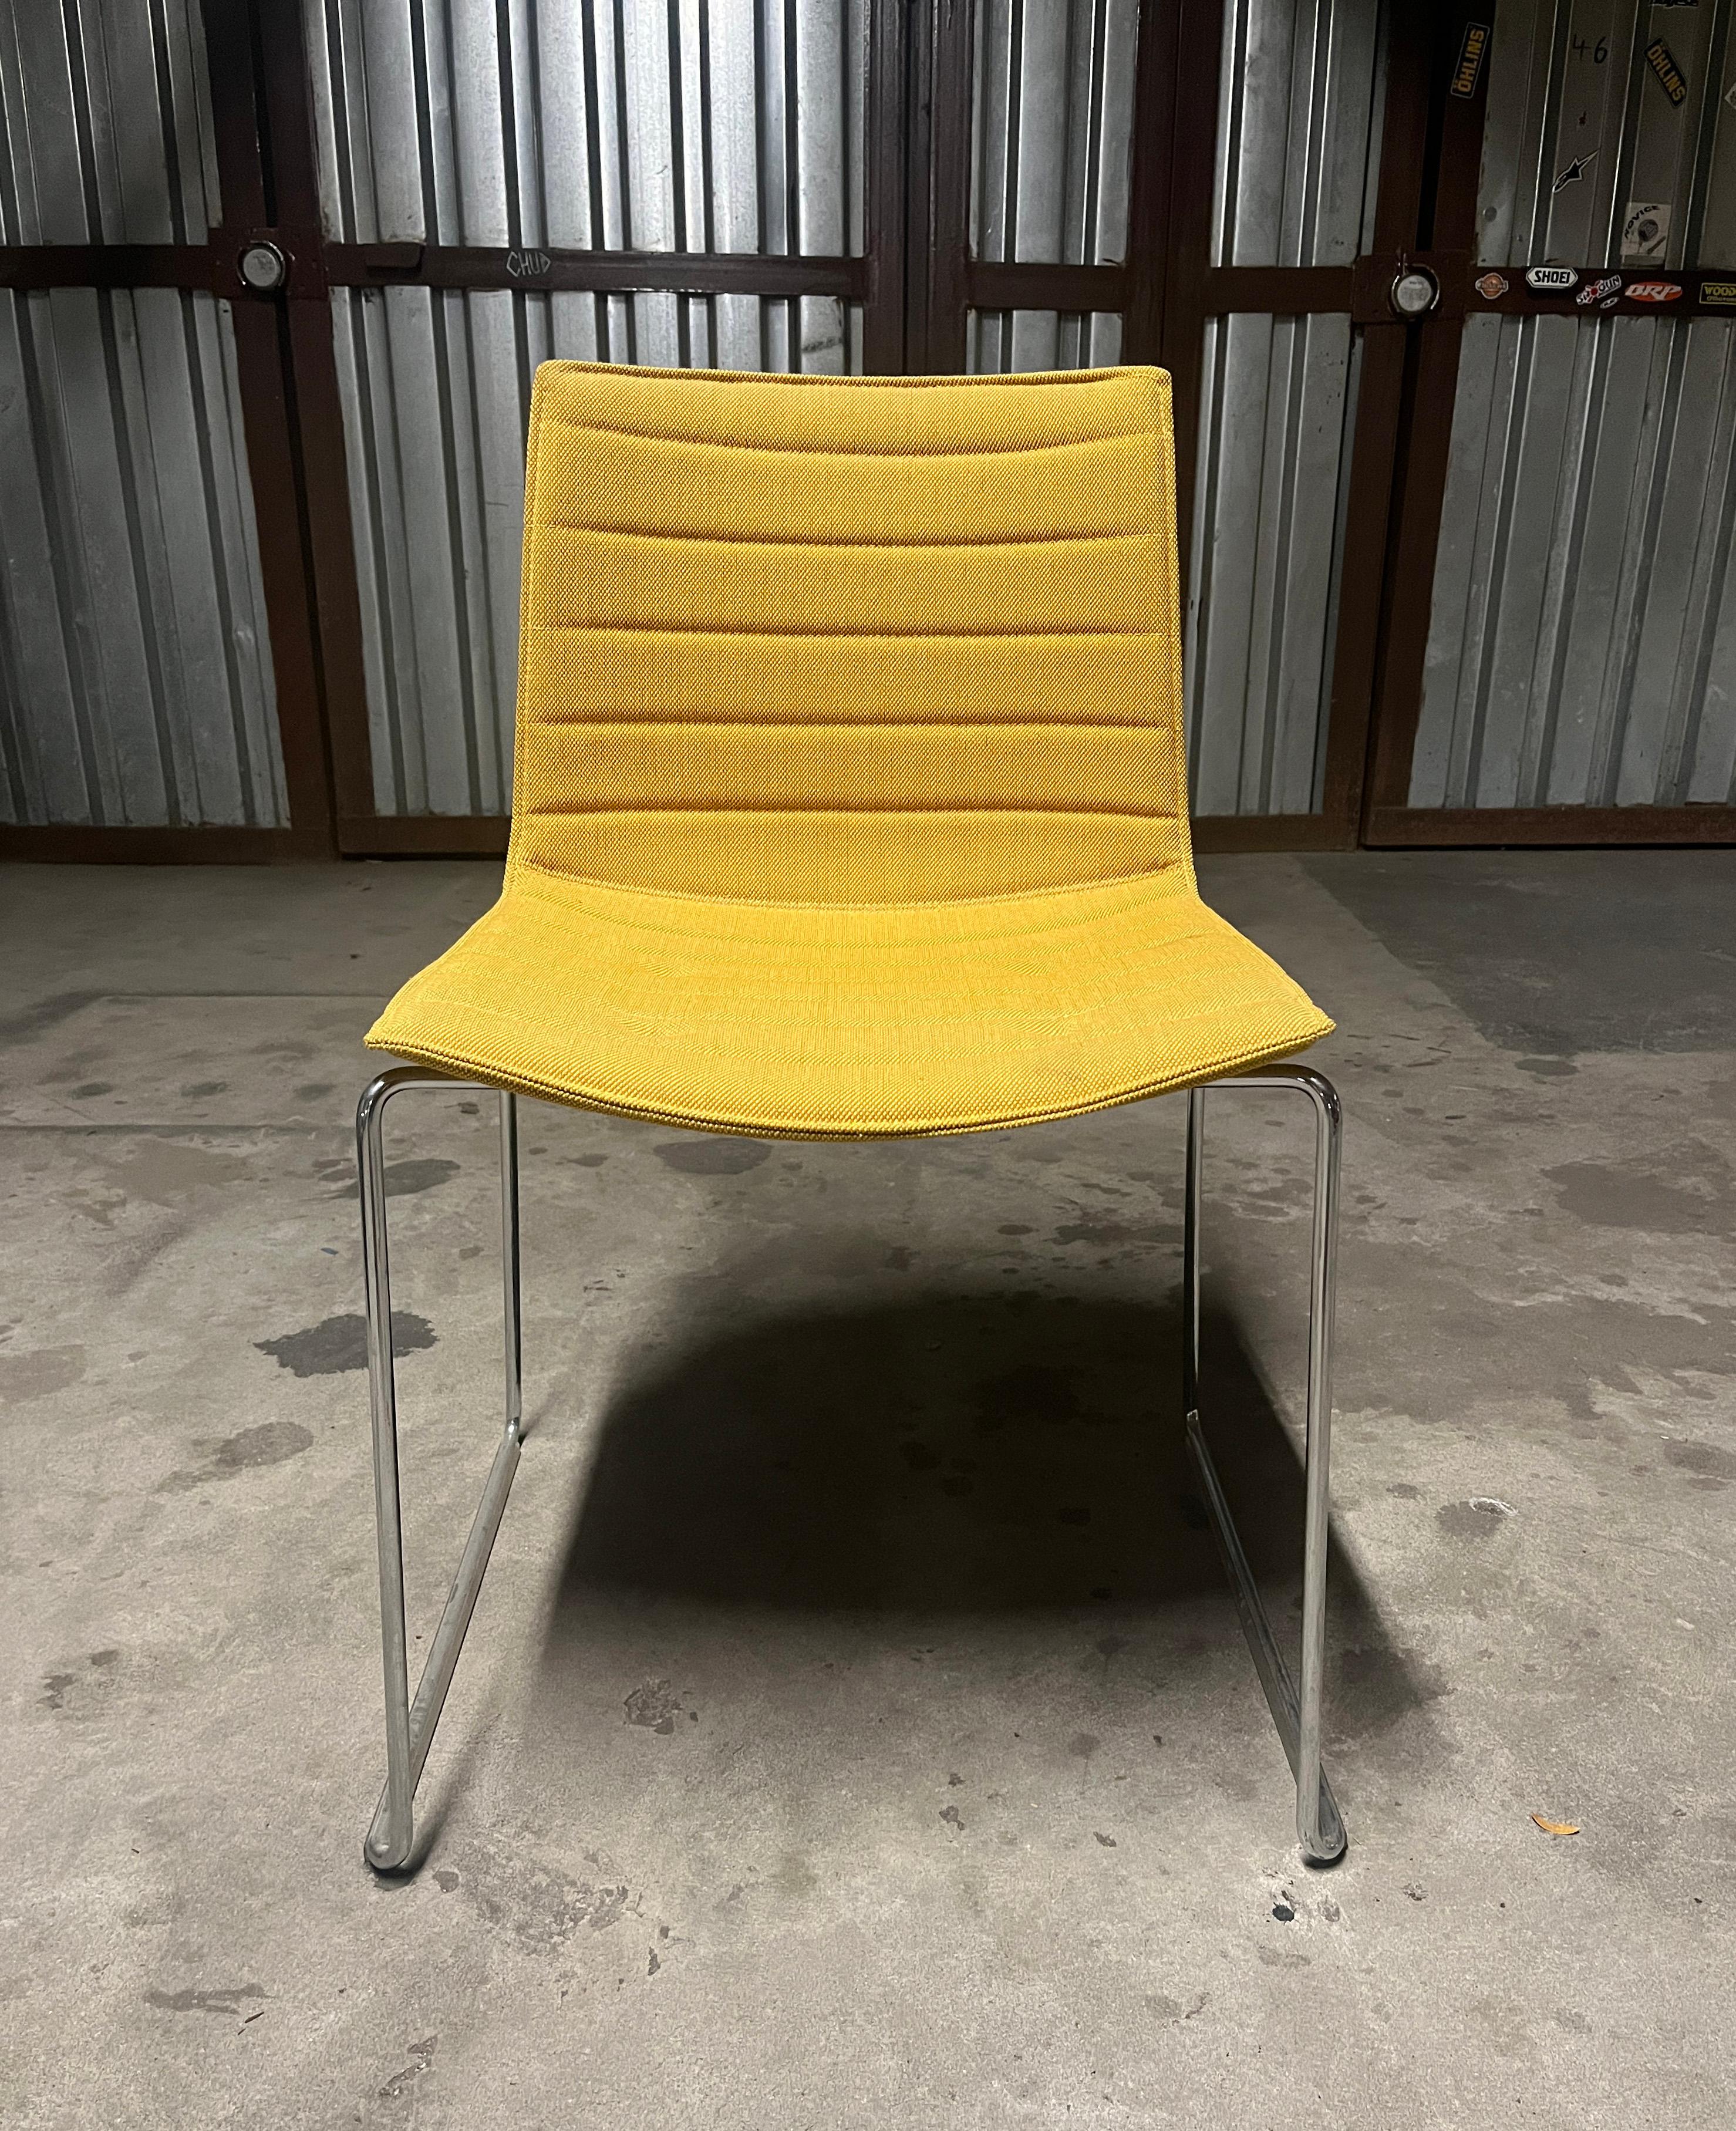 Beautiful set of 8 orange and 1 mustard upholstered stackable dining chairs. The sled chromed steel bases are in great shape contouring the seats for perfect sturdiness. The fun colors would be a great addition to any office, dinning room, or